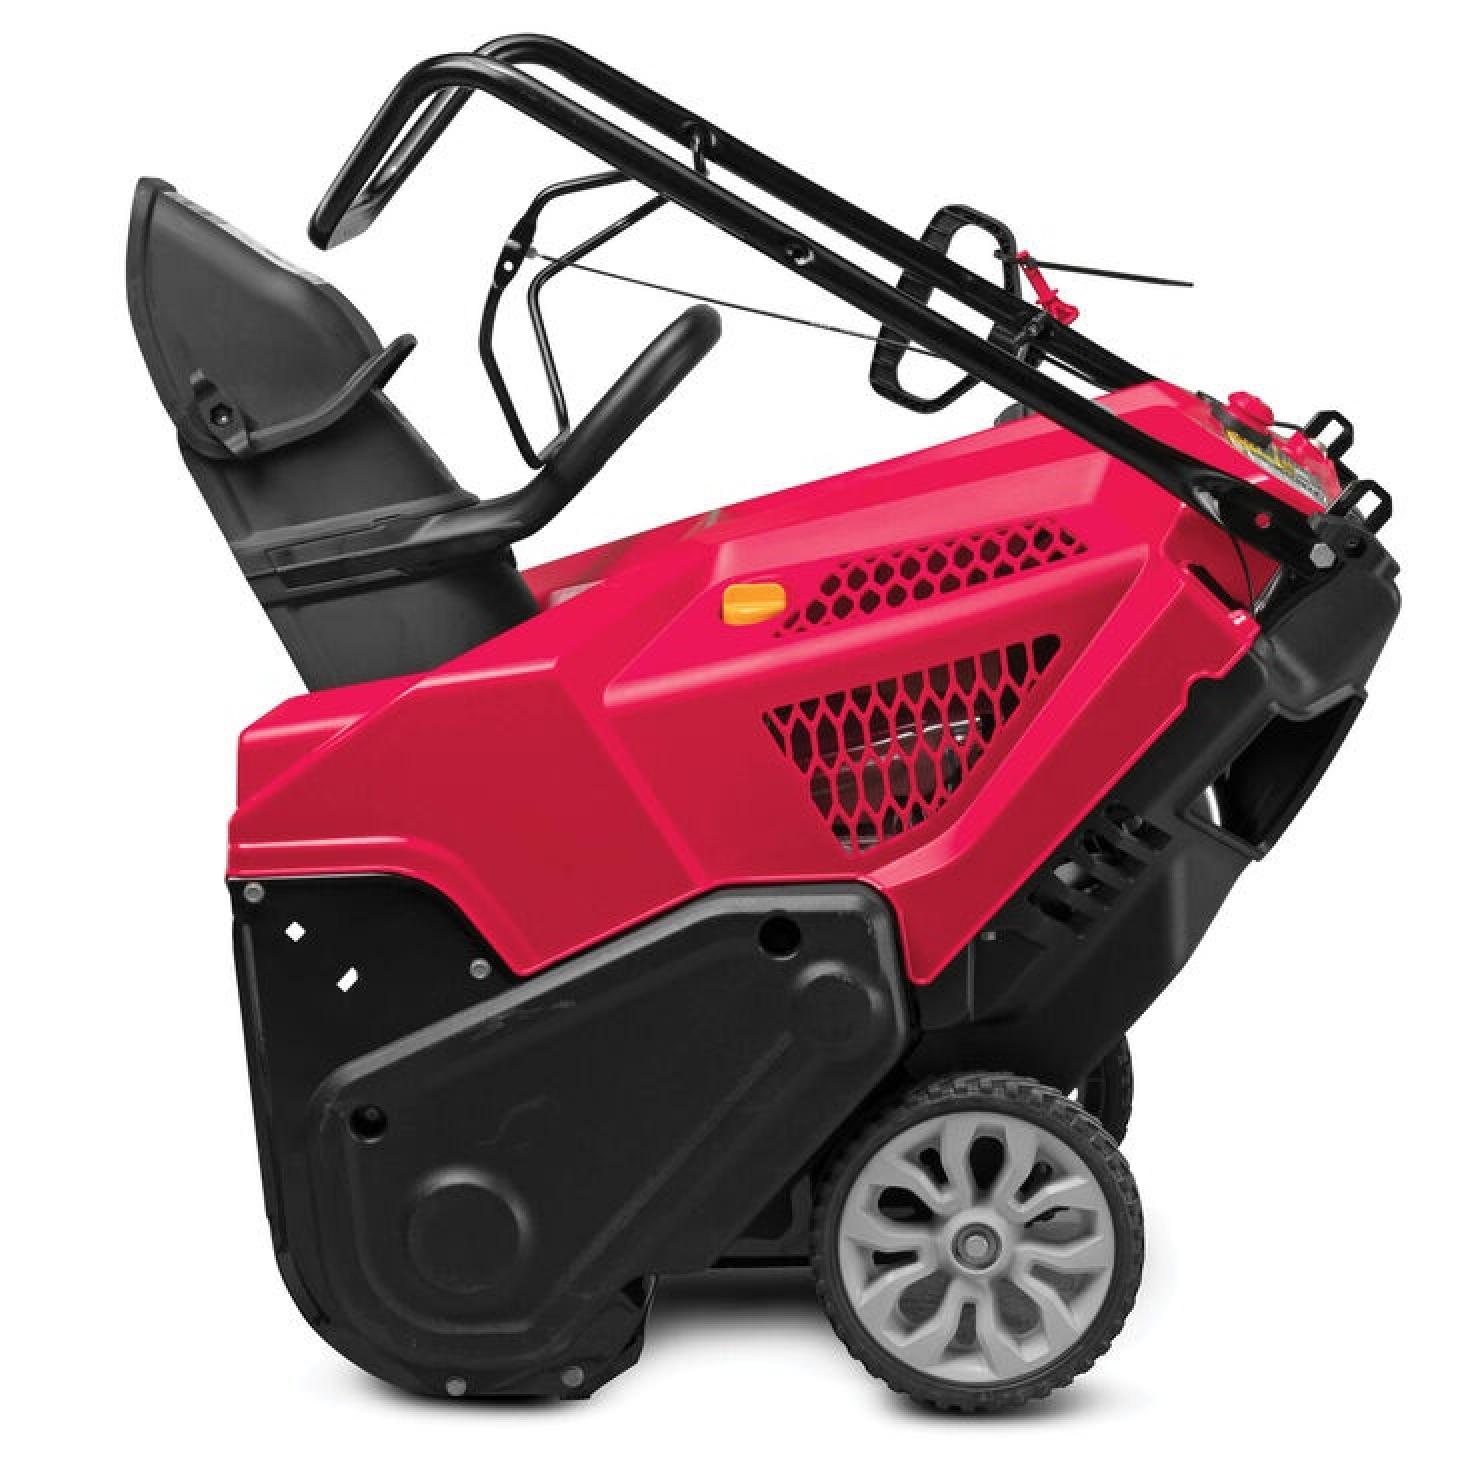 Troy-Bilt Squall 179E Single Stage Snow Blower